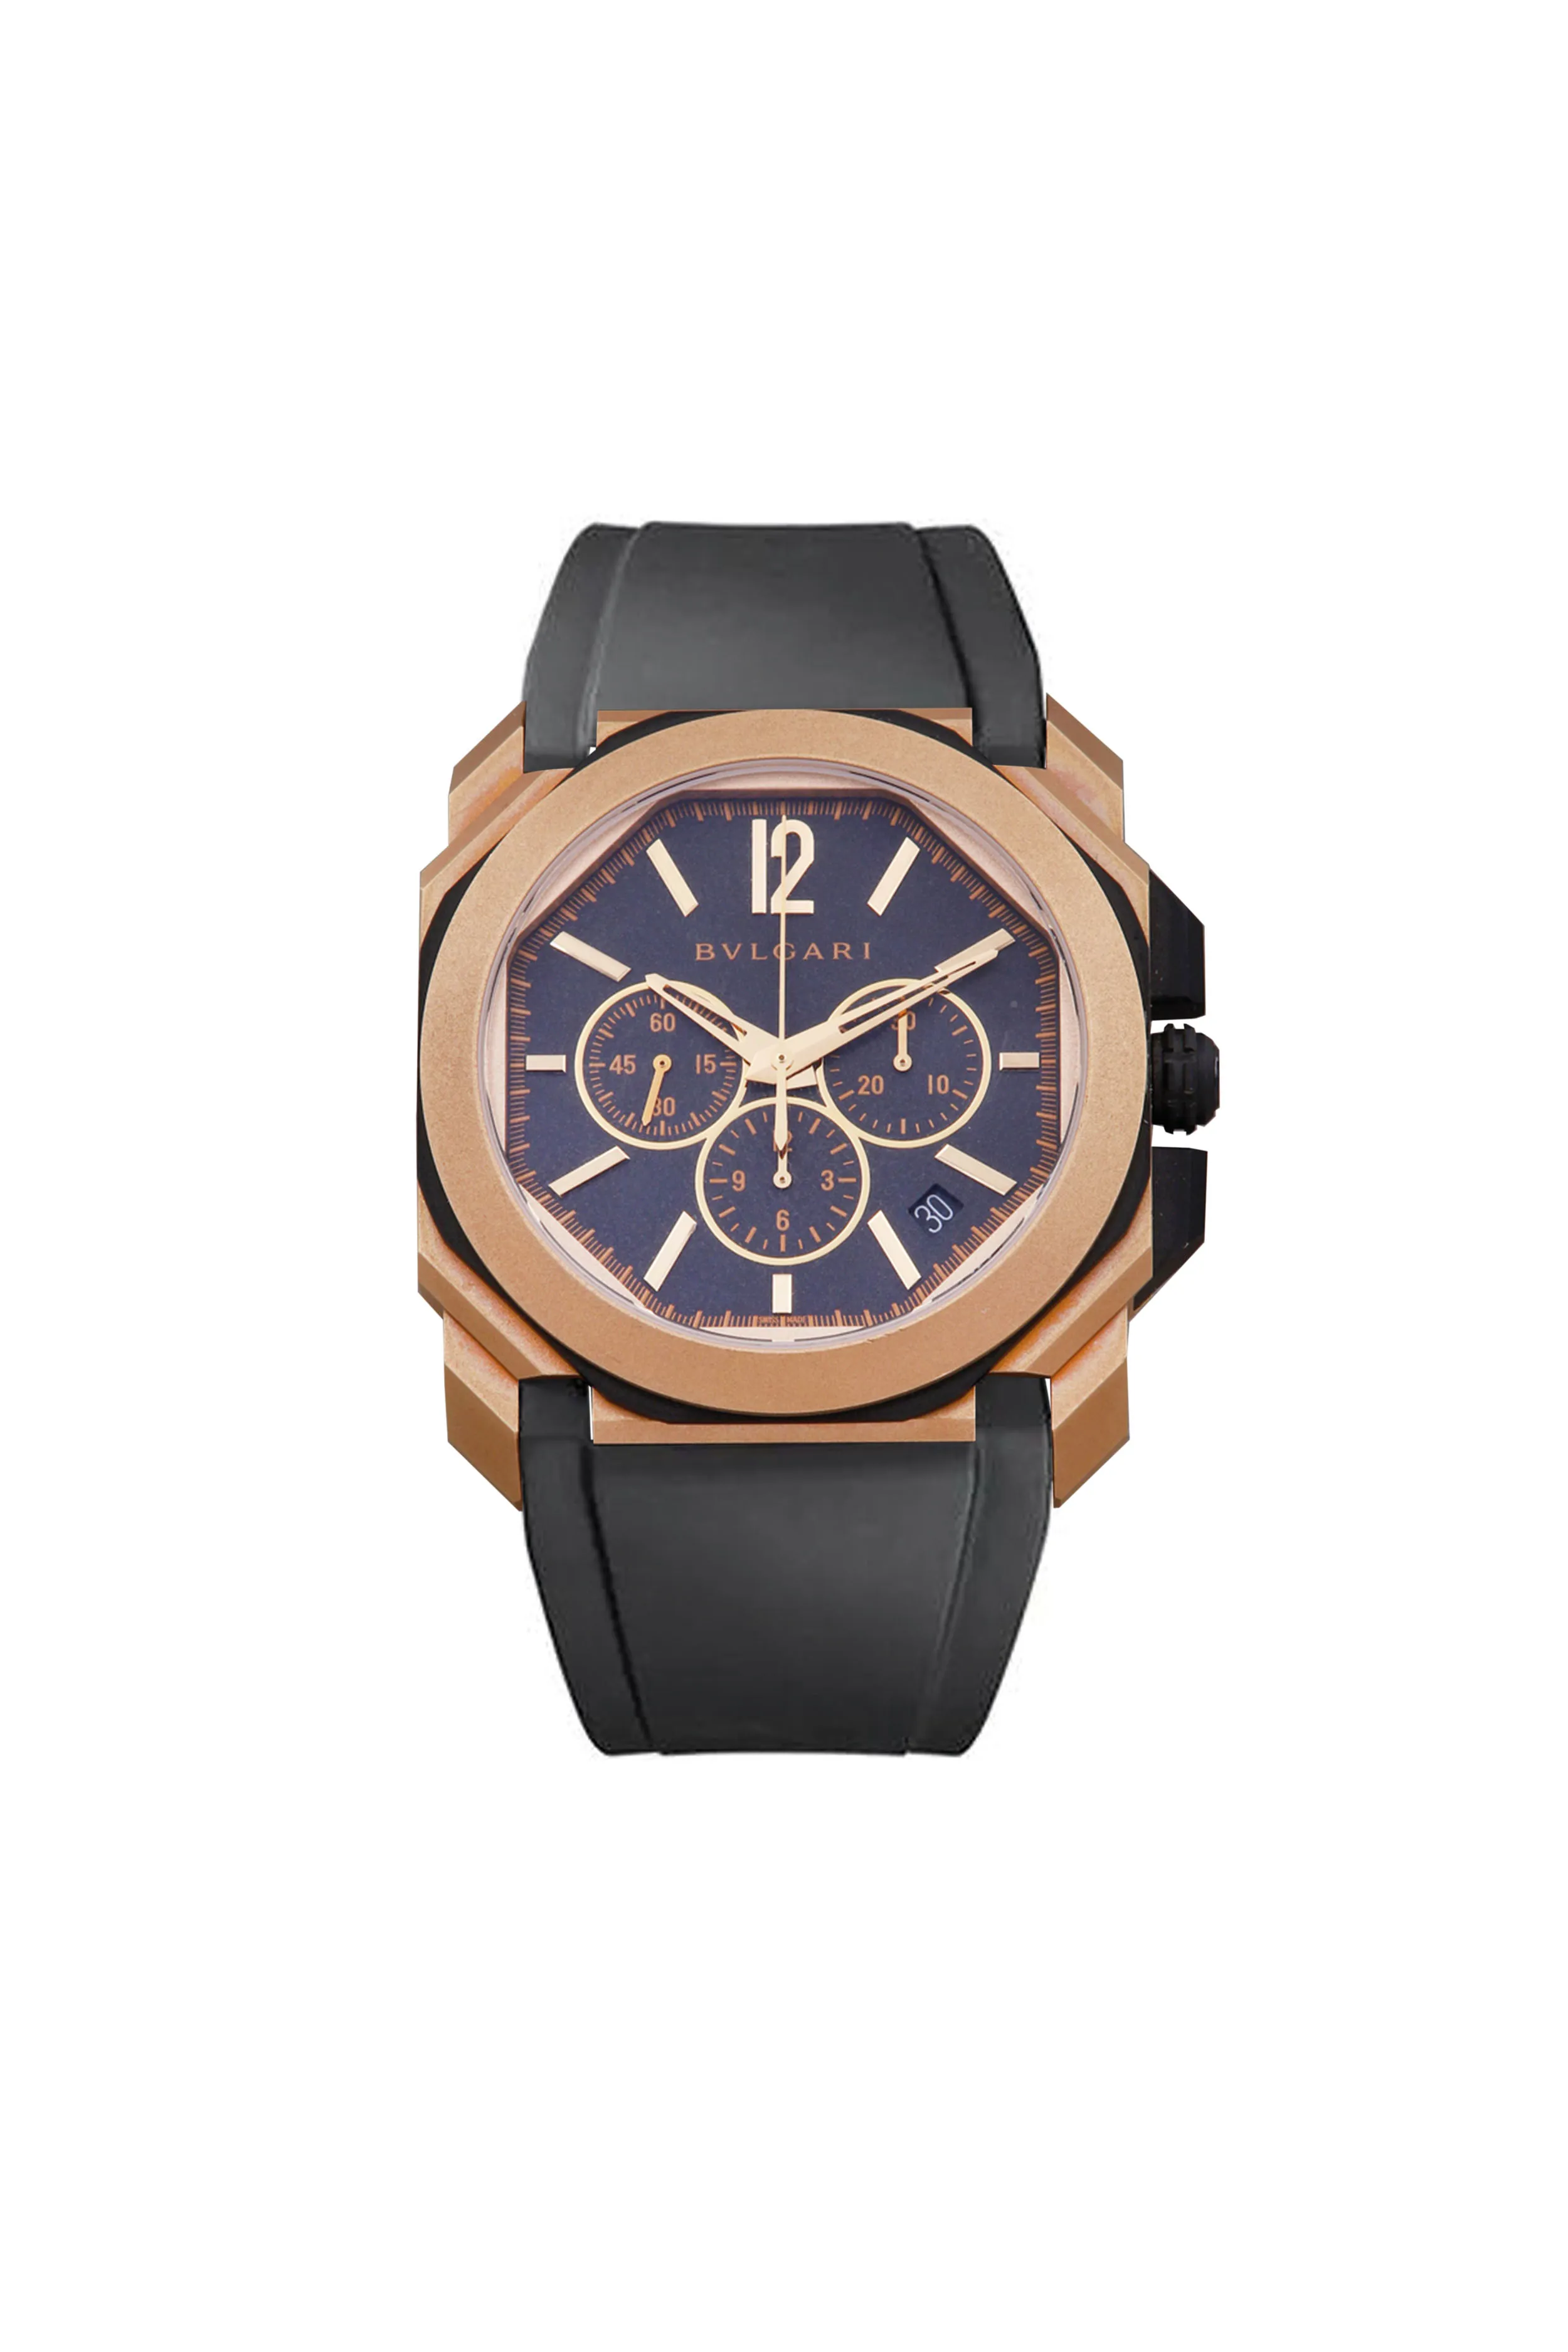 BVLGARI Octo BGO P 41 SG CH 41mm Rose gold and stainless steel